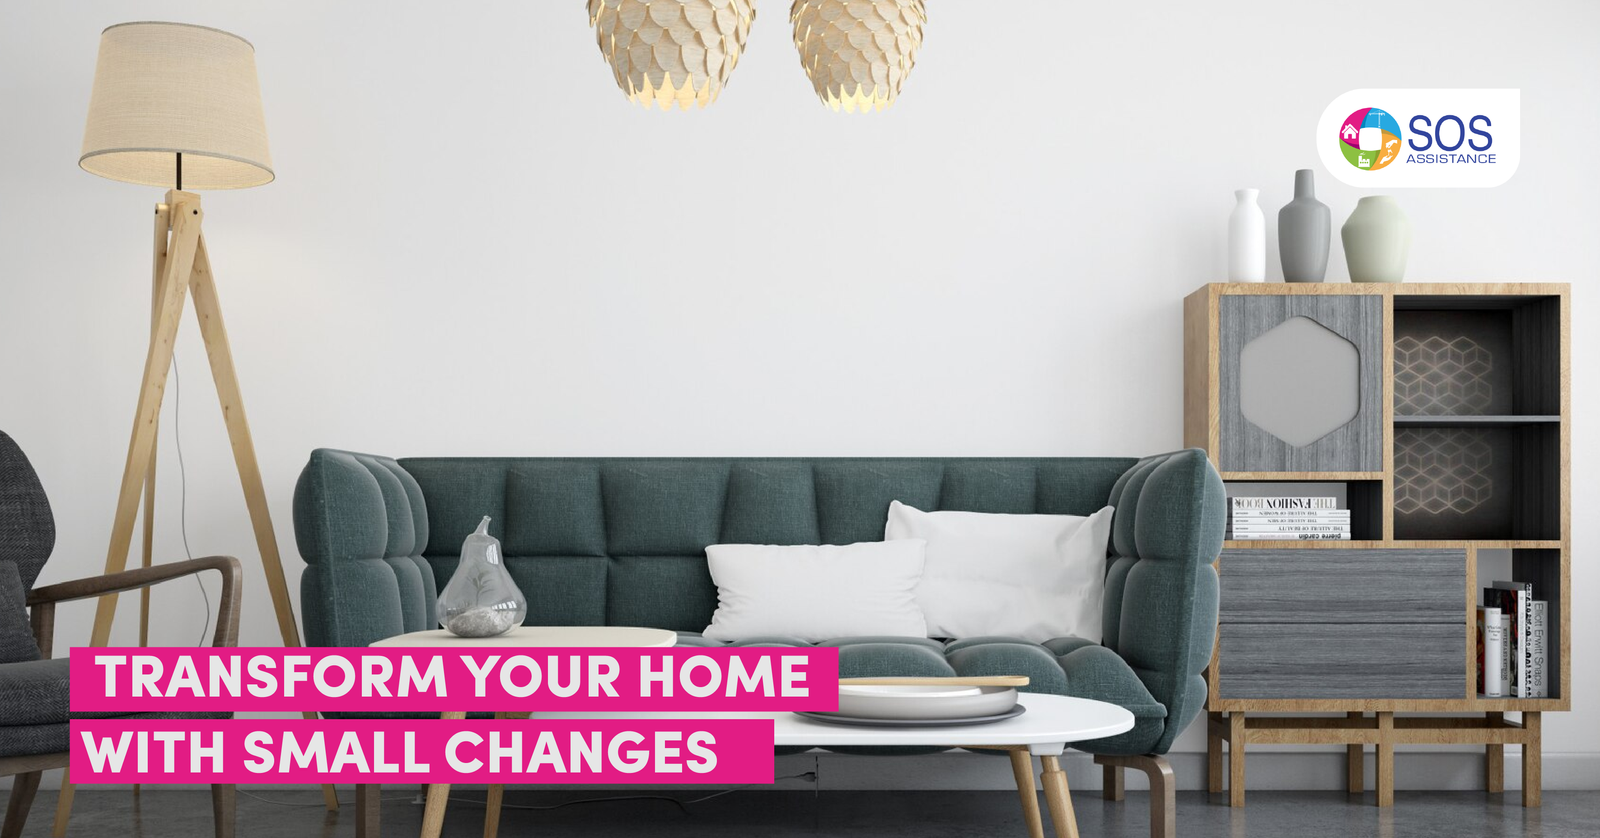 TRANSFORM YOUR HOME WITH SMALL CHANGES